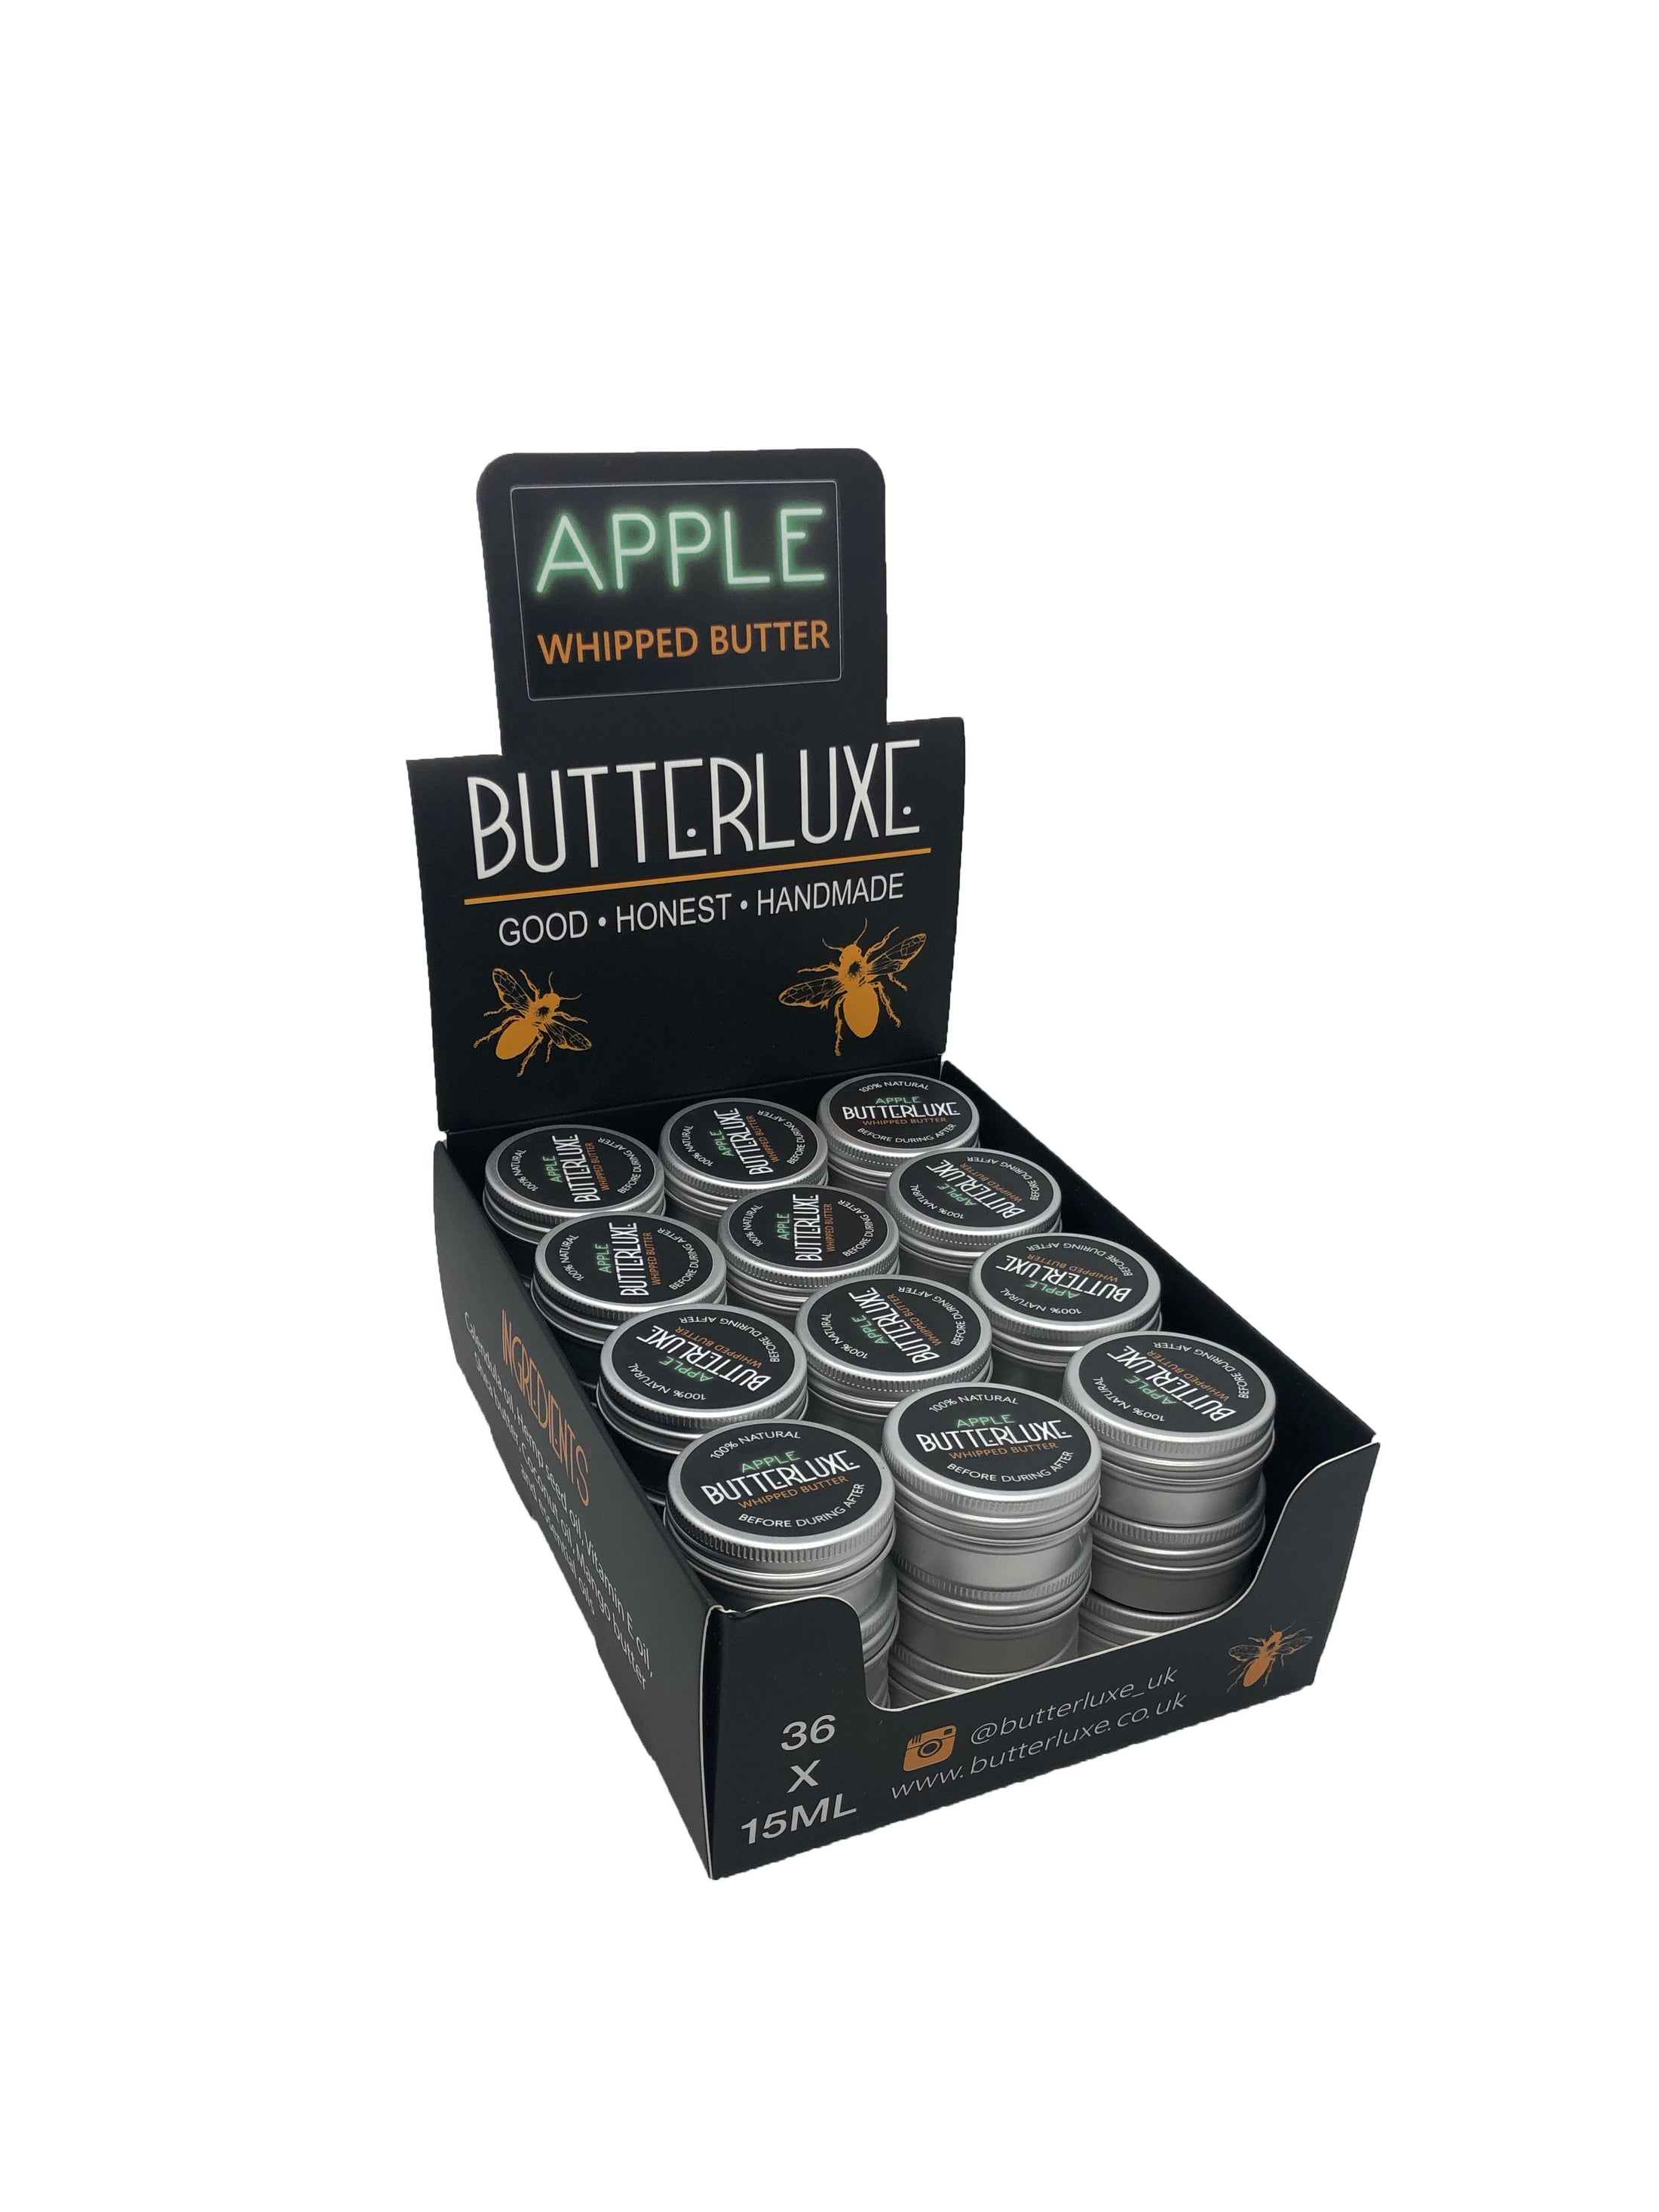 Apple Whipped Butter